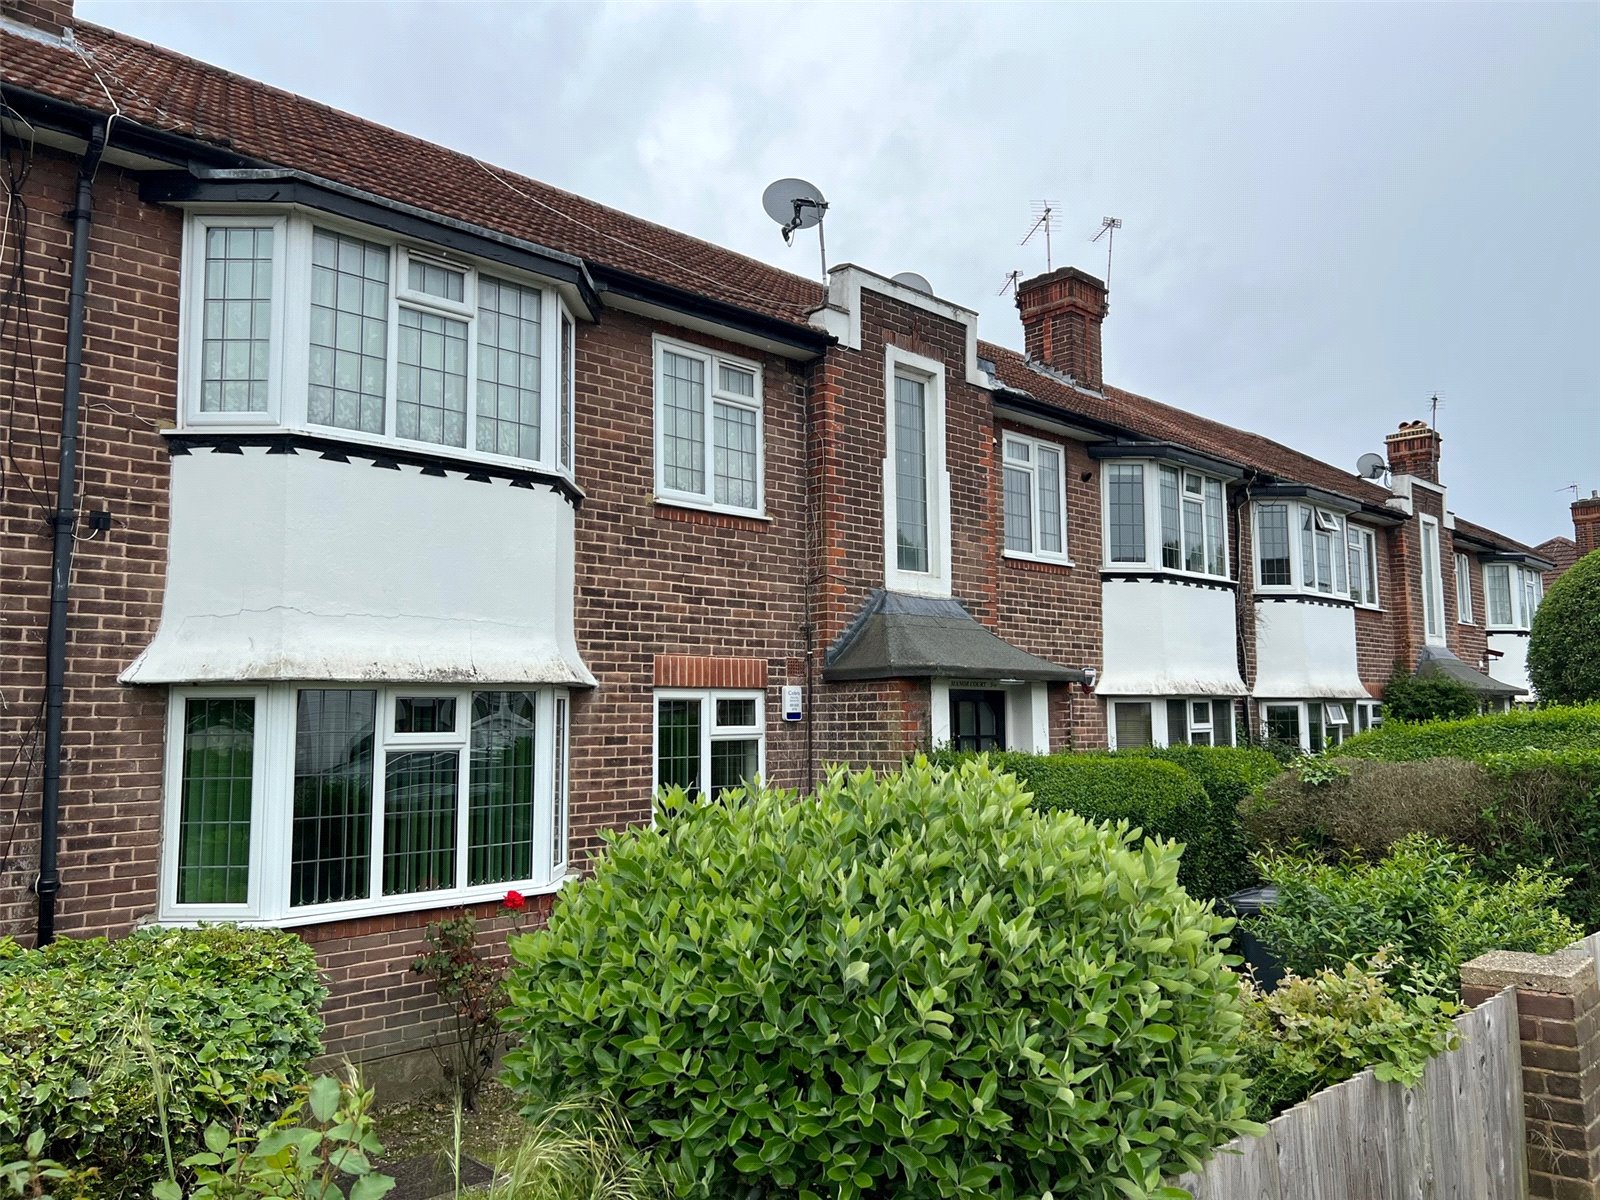 2 bed  to rent in York Way, Whetstone, N20 